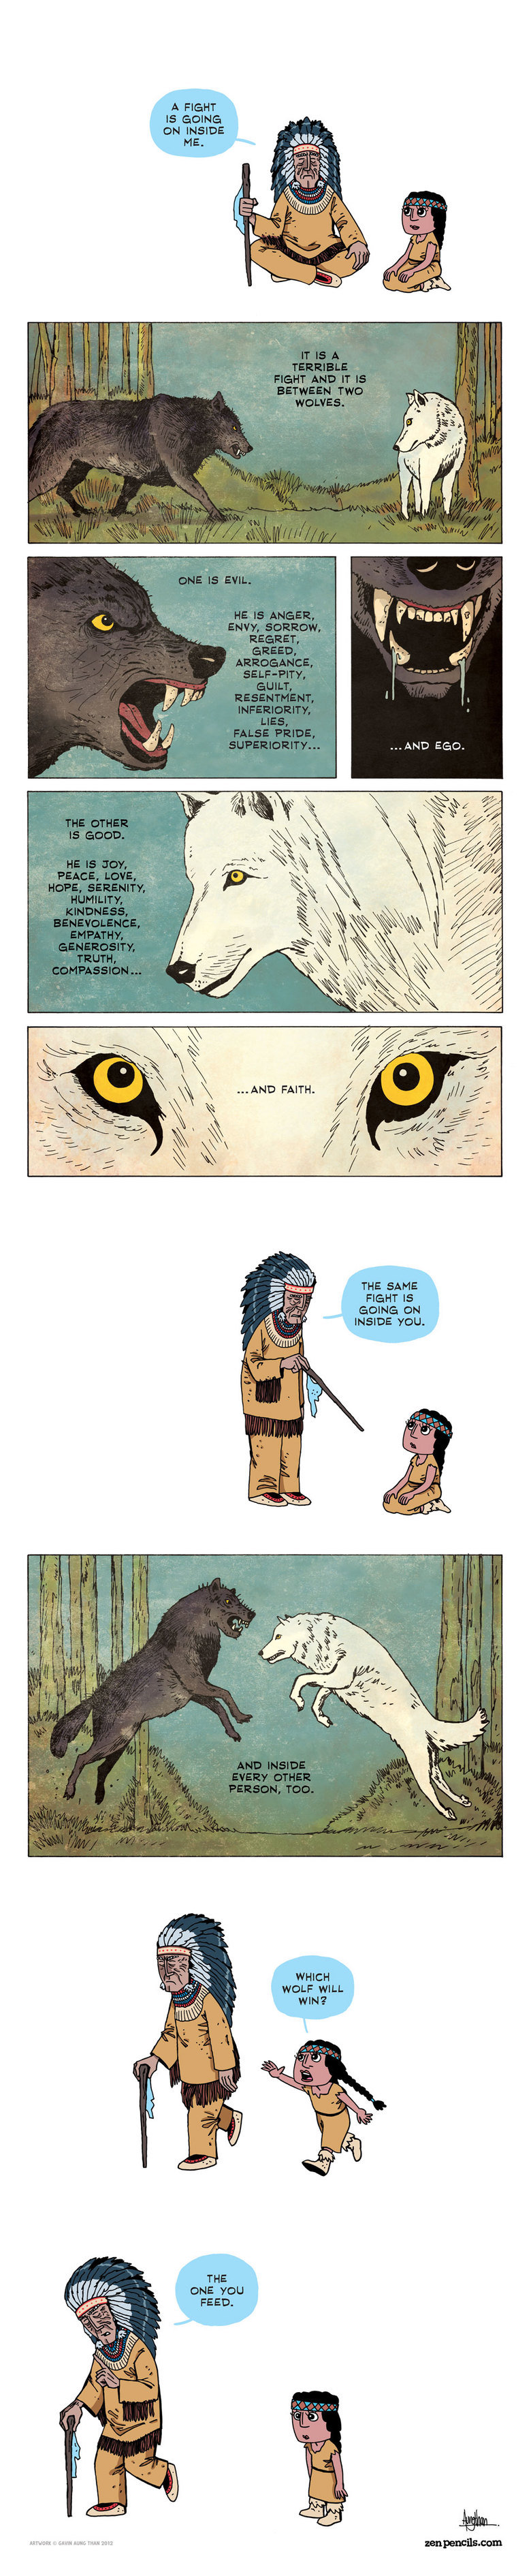 Two Wolves. Not mine, credit to zenpencils.com. THE SAME FIGHT’ IS GOING ON INSIDE YOU.. Starve them both. Effing douches wanna fight inside me gonna up my organs and , they can take it outside, they get nothing.